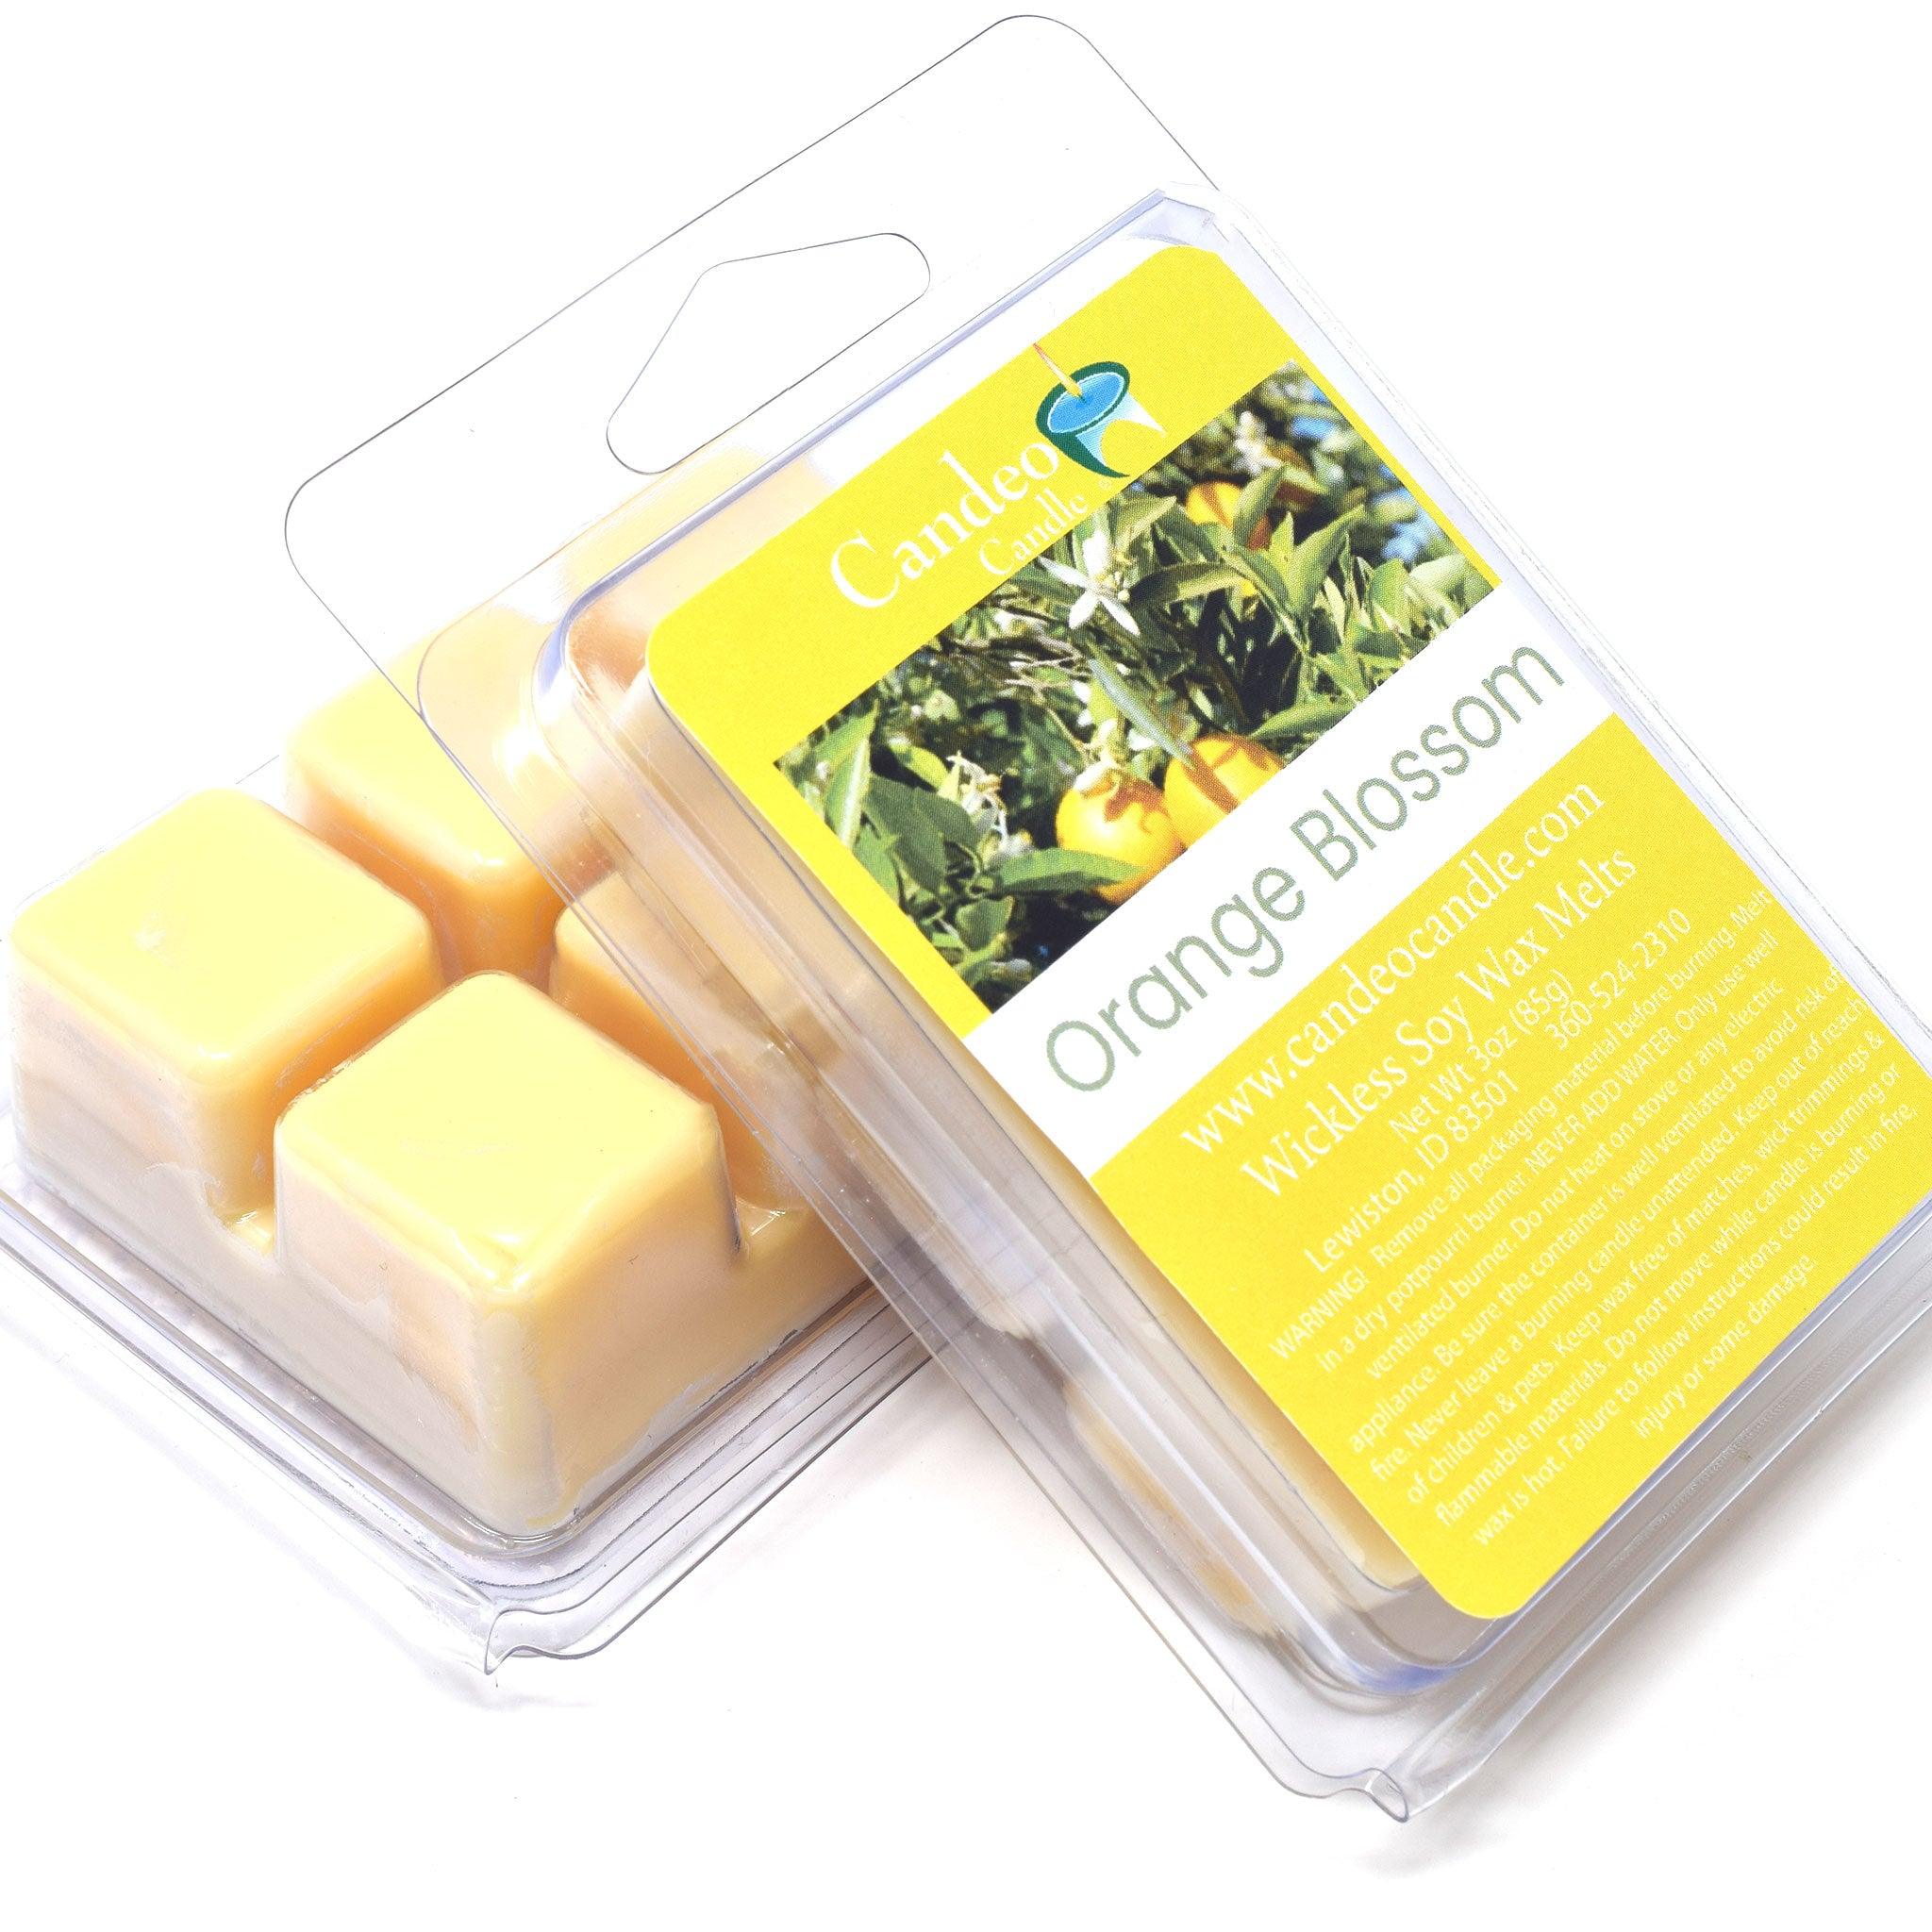 Orange Blossom, Soy Melt Cubes, 2-Pack - Candeo Candle